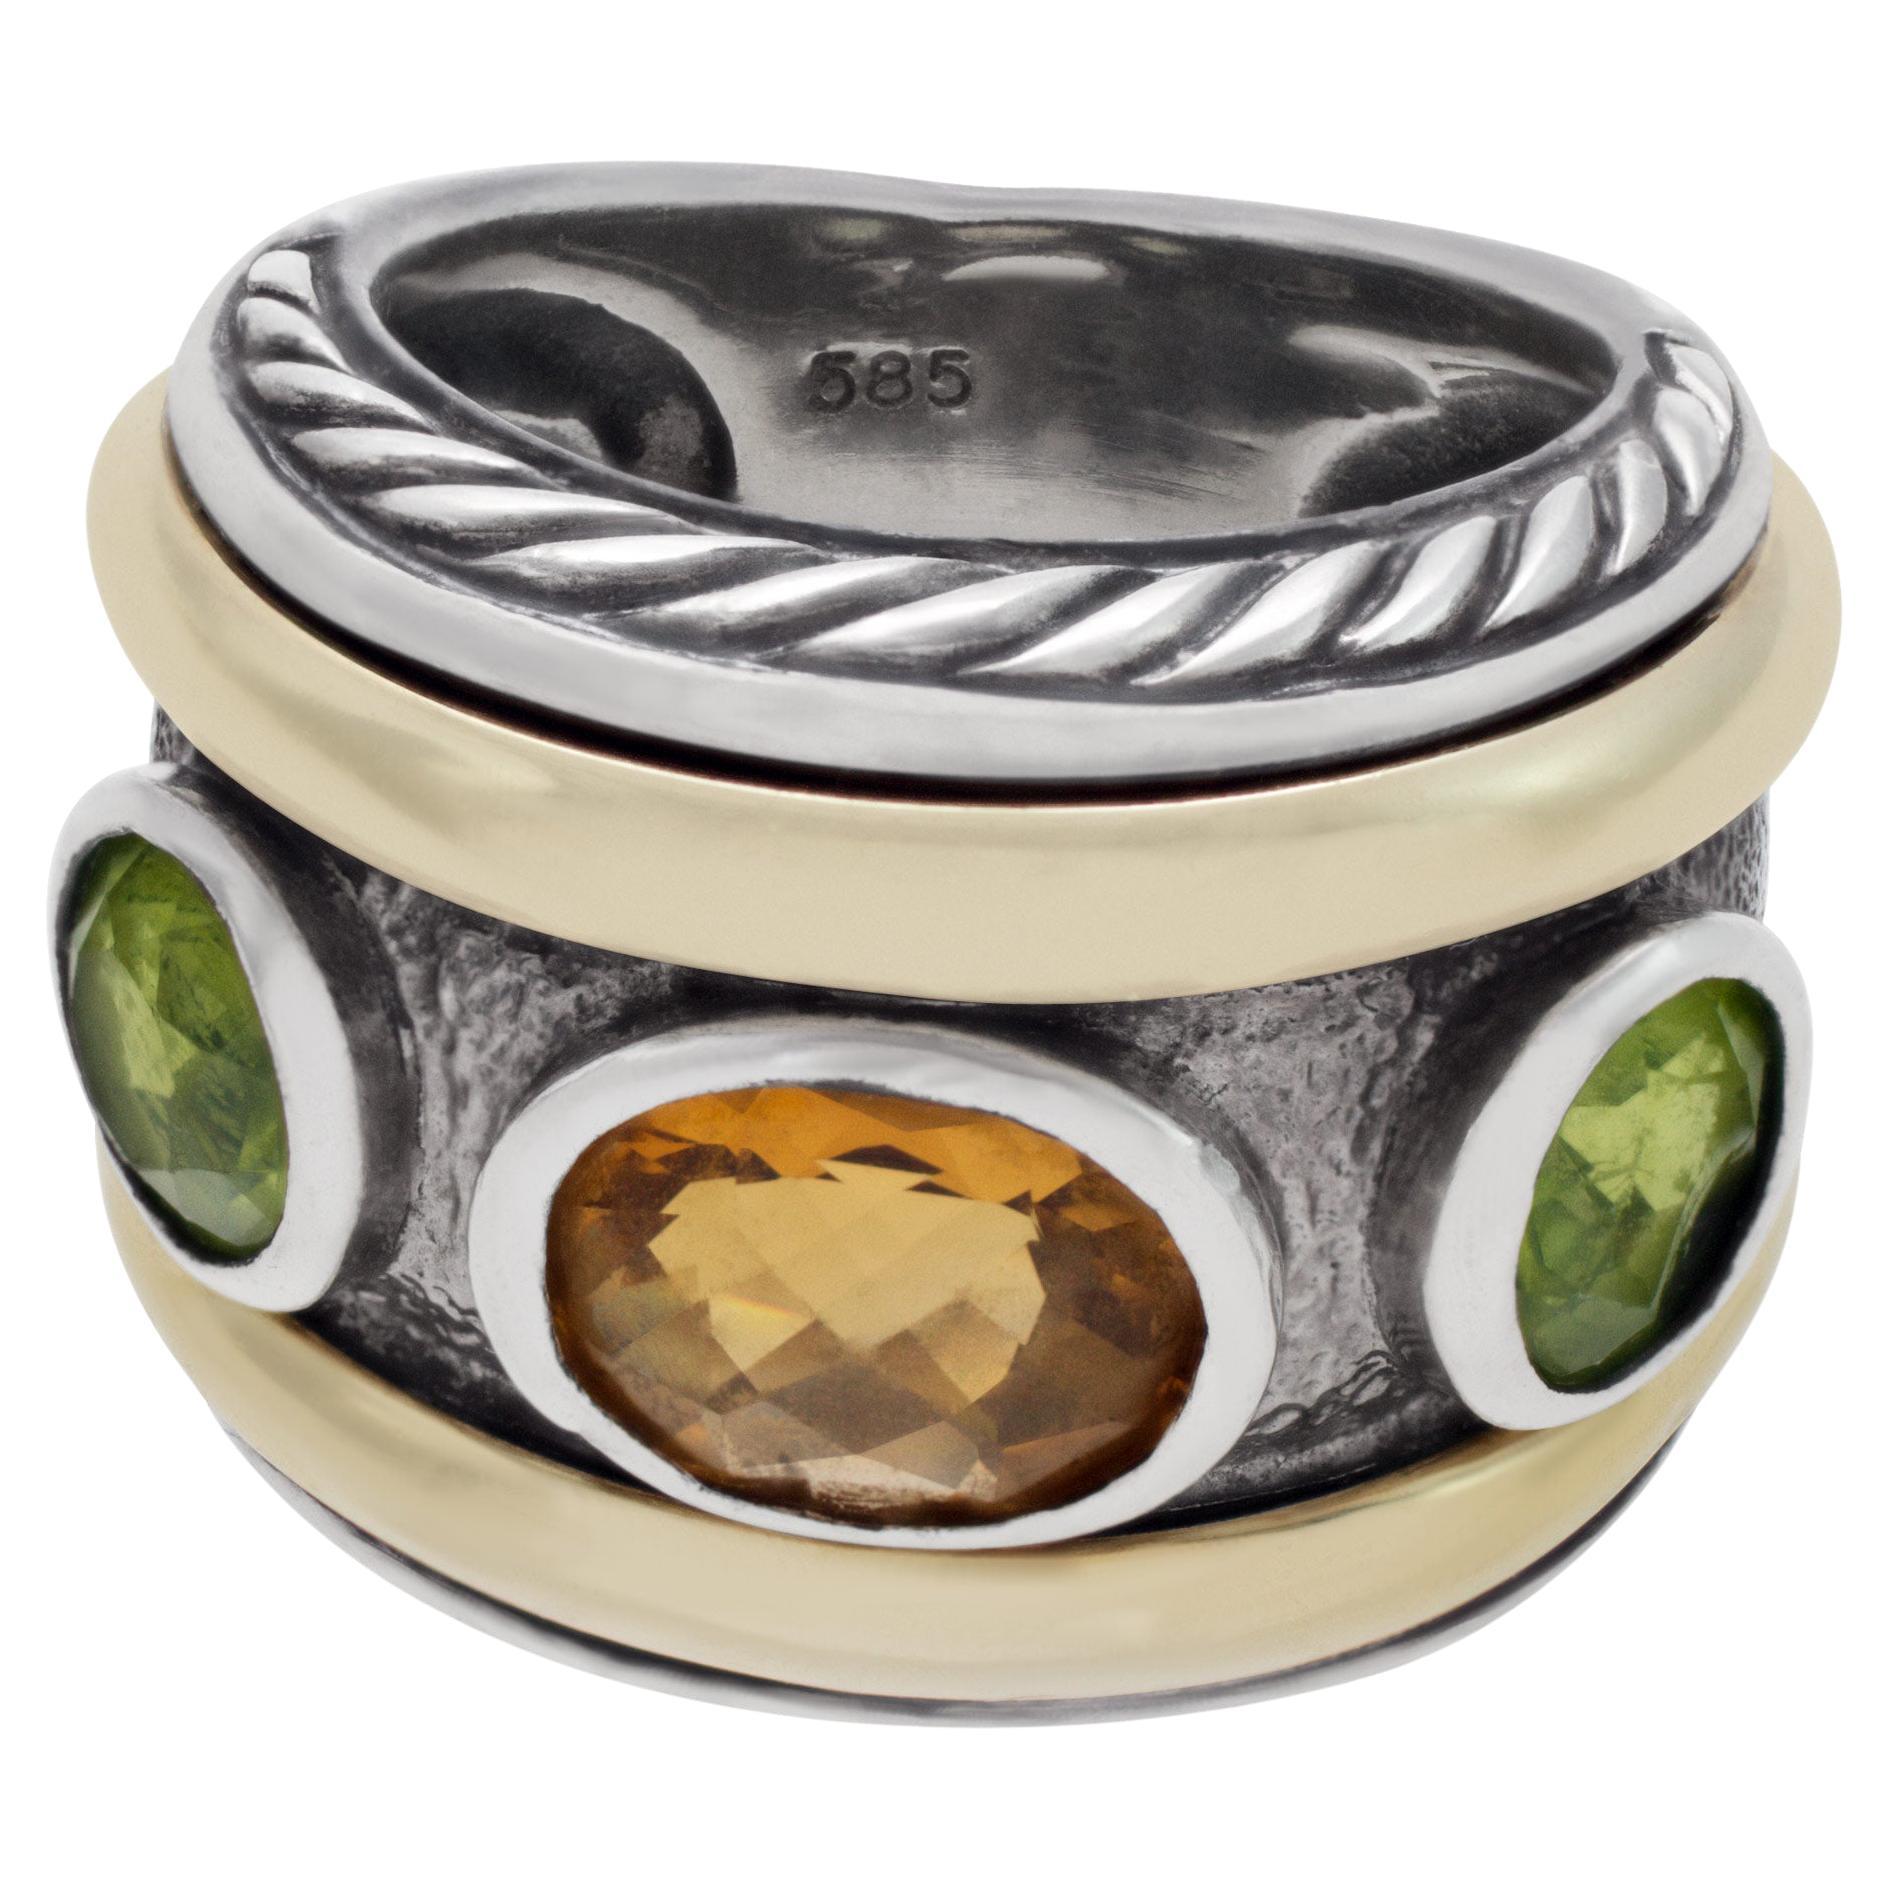 David Yurman Peridot and Citrine in 14k Gold and Sterling Silver in Ring